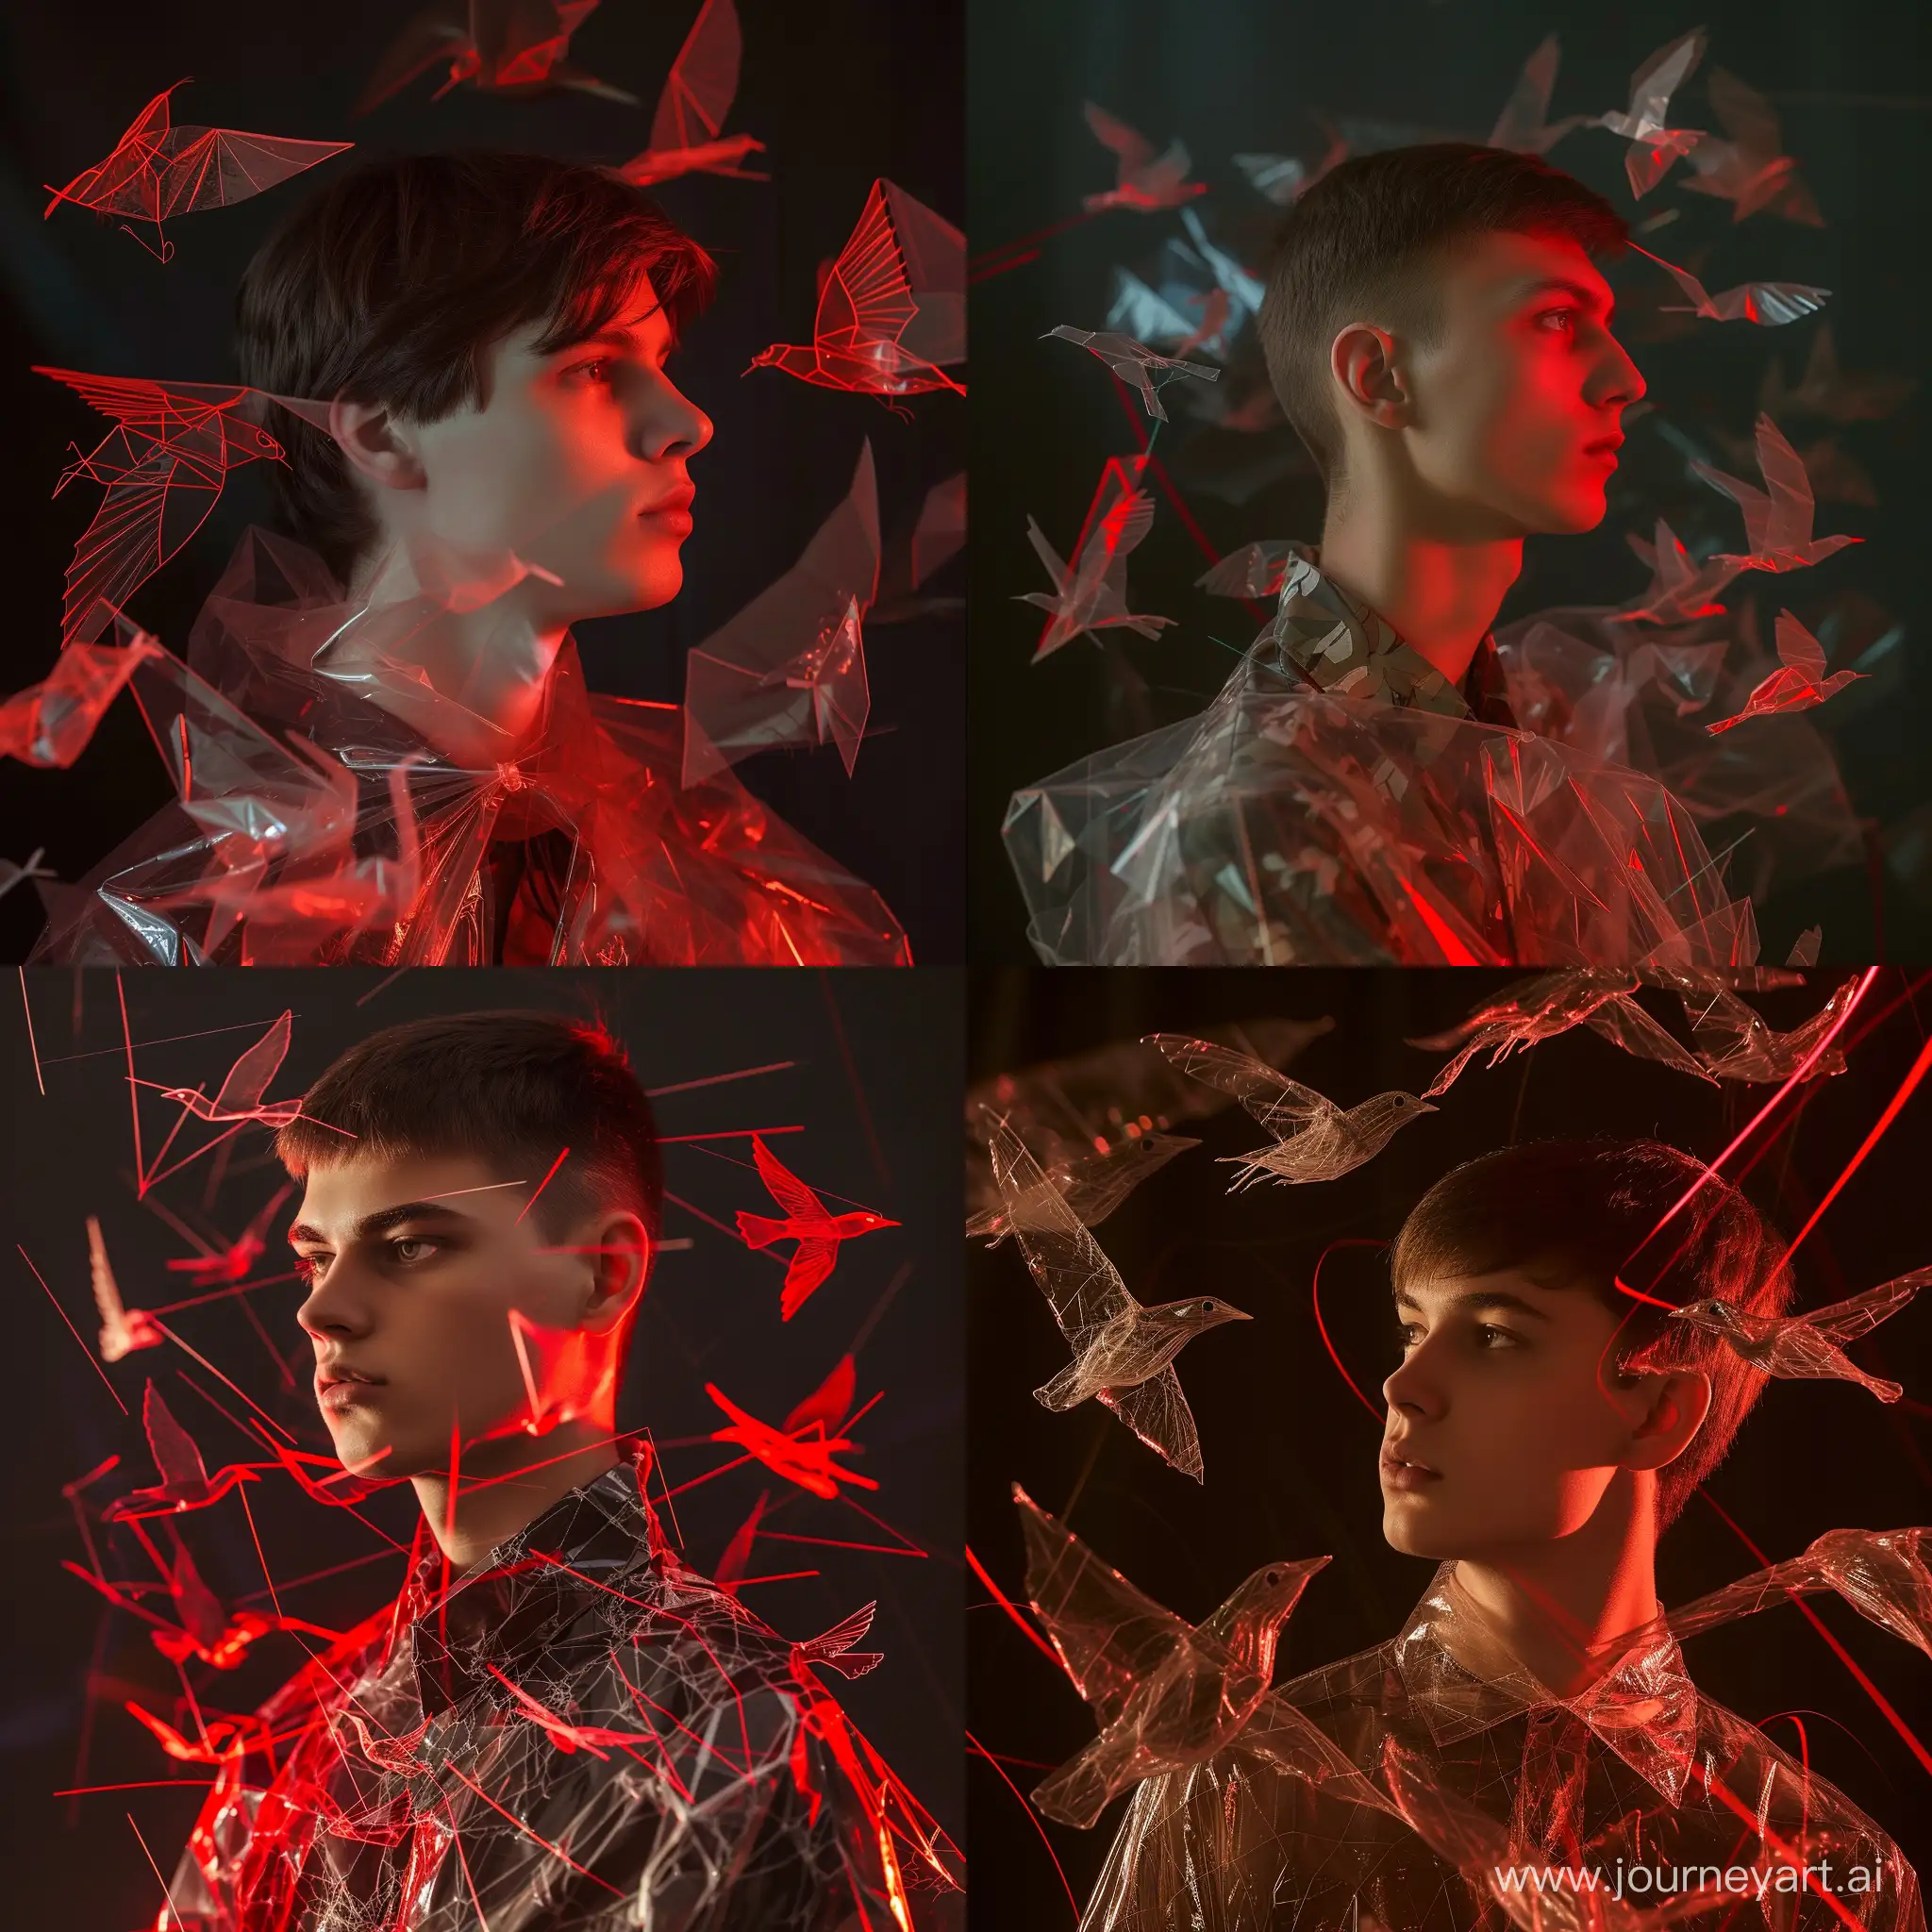 19 y.o man, dark brown hair, short haircut, Slavic type, dressed in cellophane, geometric shapes on a dark background, birds made of cellophane, red contour light, dynamics of angle and movement, fashion photo, visualization, interpretation